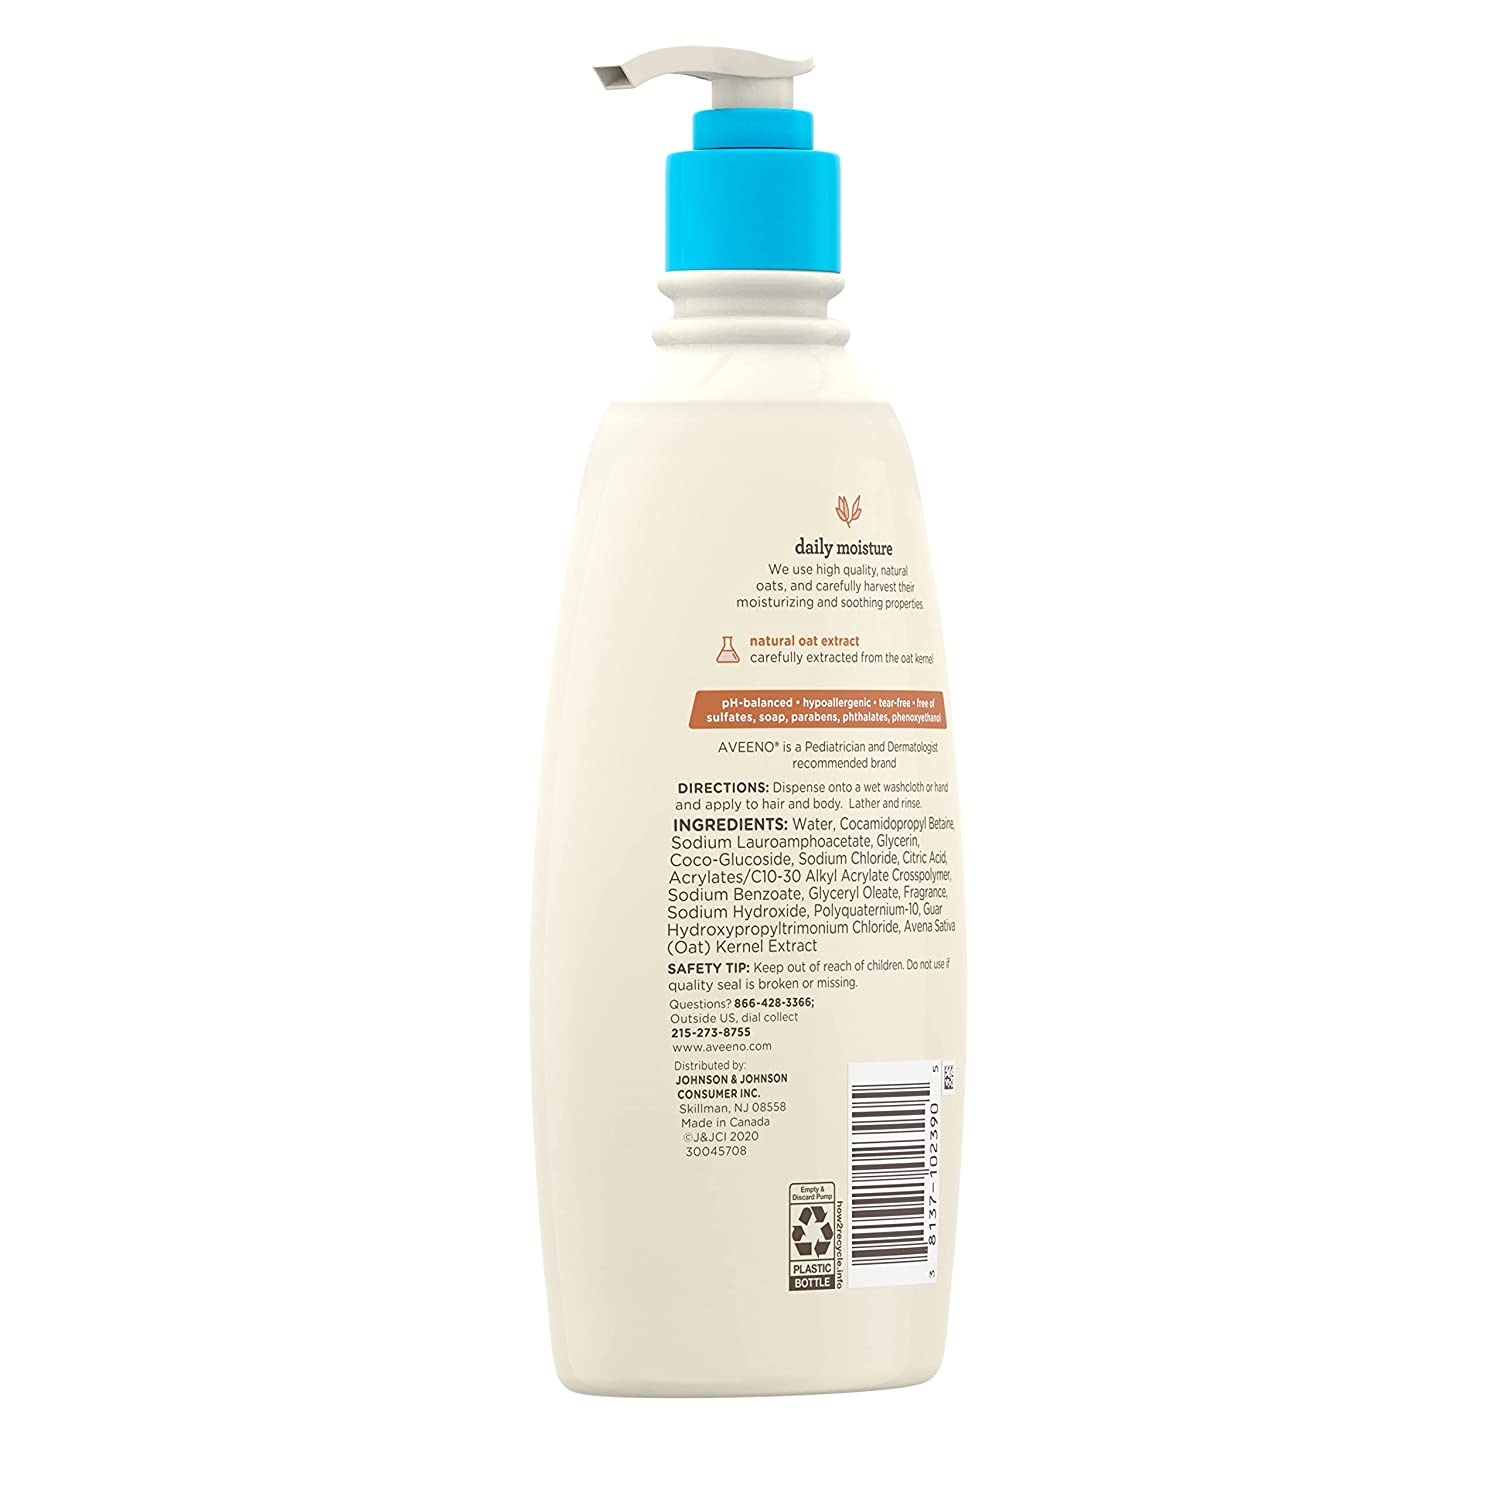 Aveeno Baby Daily Moisture Wash and Shampoo with Oat Extract Gentle on Hair & Skin 532 ml - Baby Moo